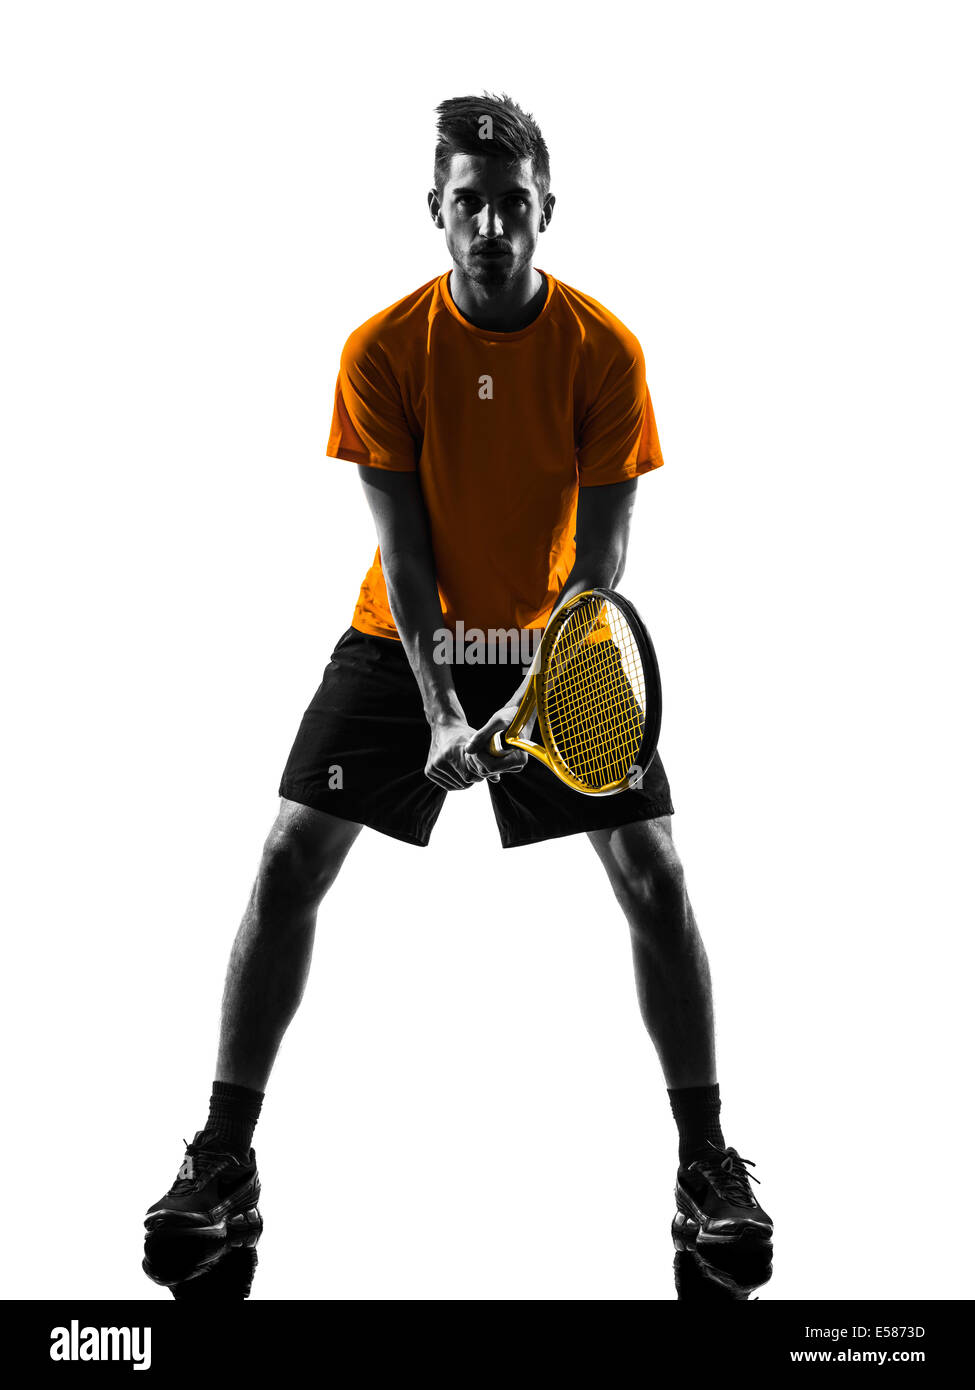 one man tennis player in silhouette on white background Stock Photo